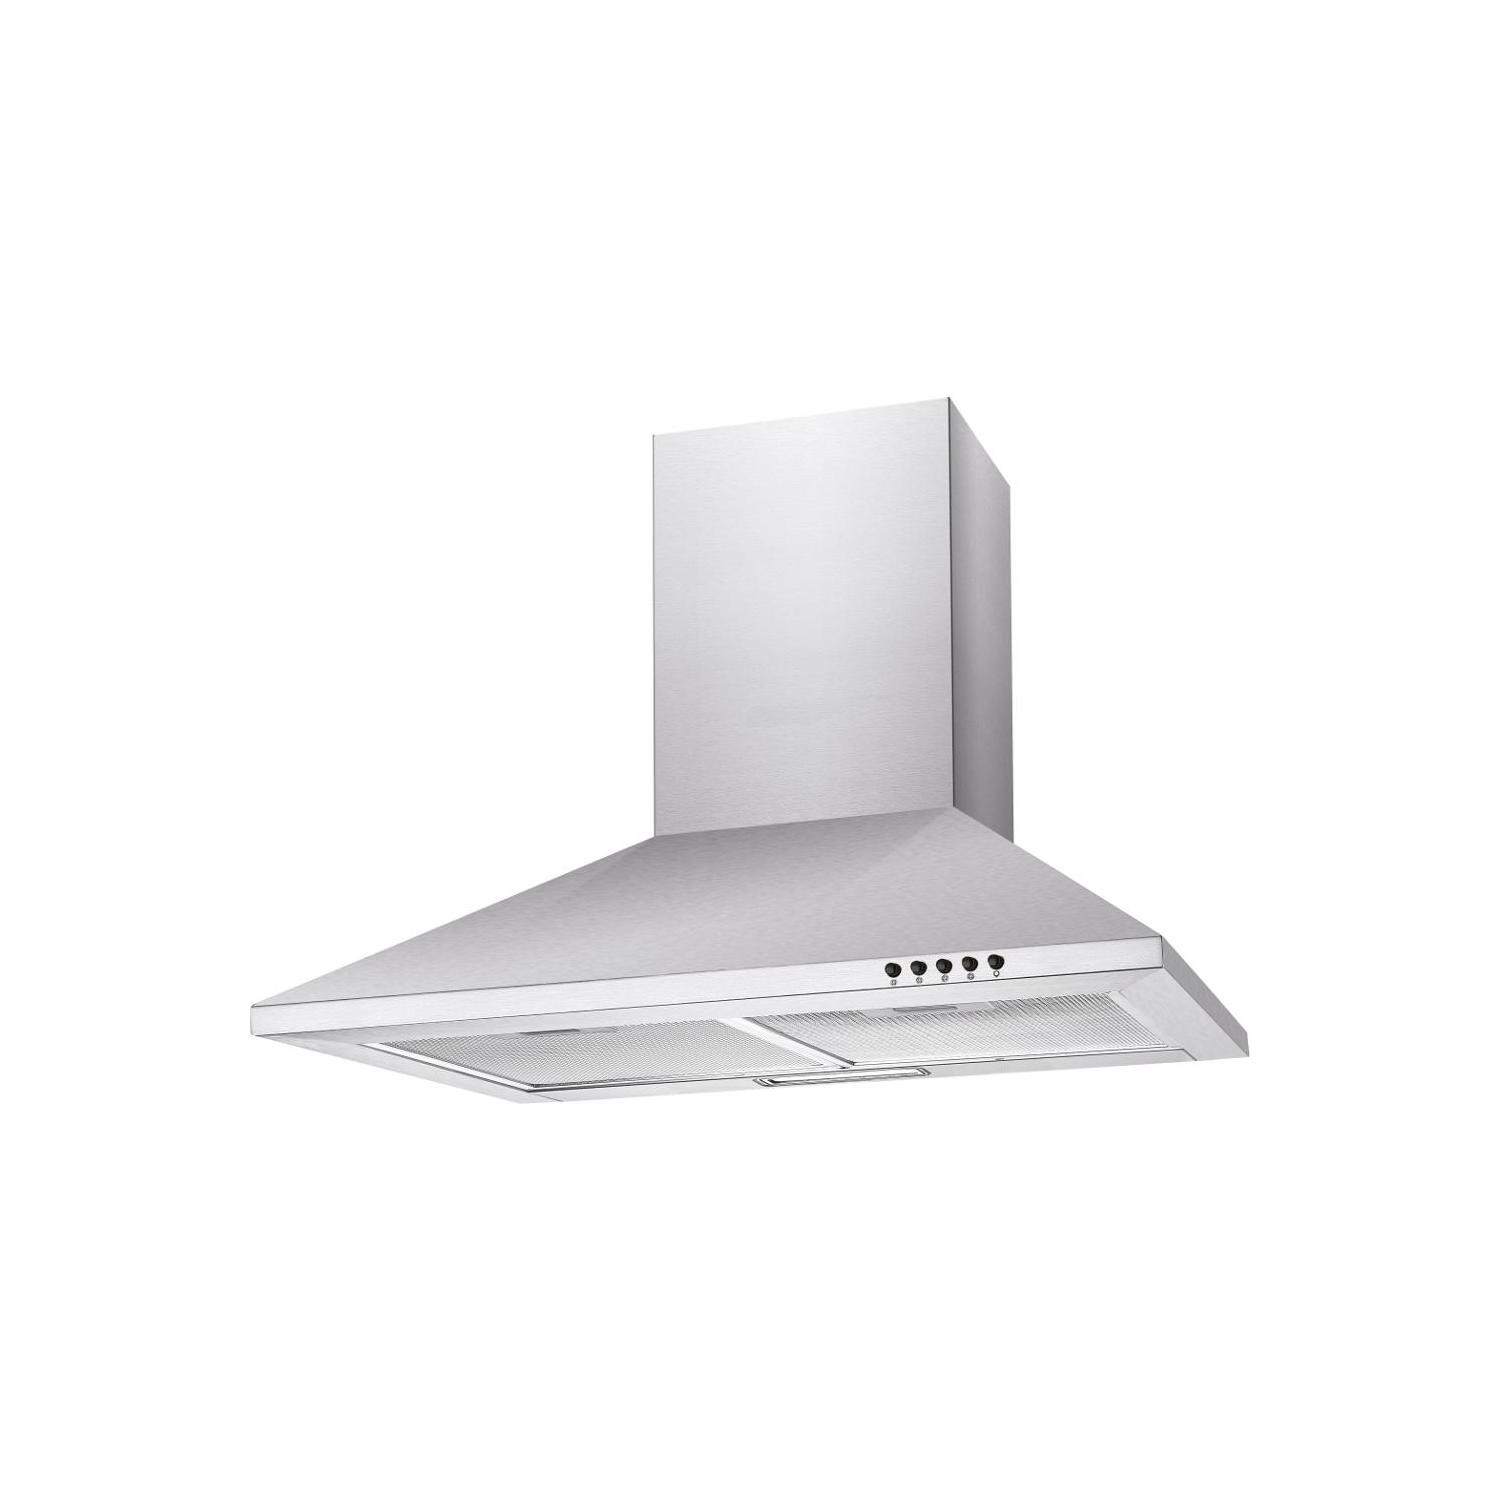 Refurbished Candy CCE60NX 60cm Chimney Cooker Hood Stainless Steel